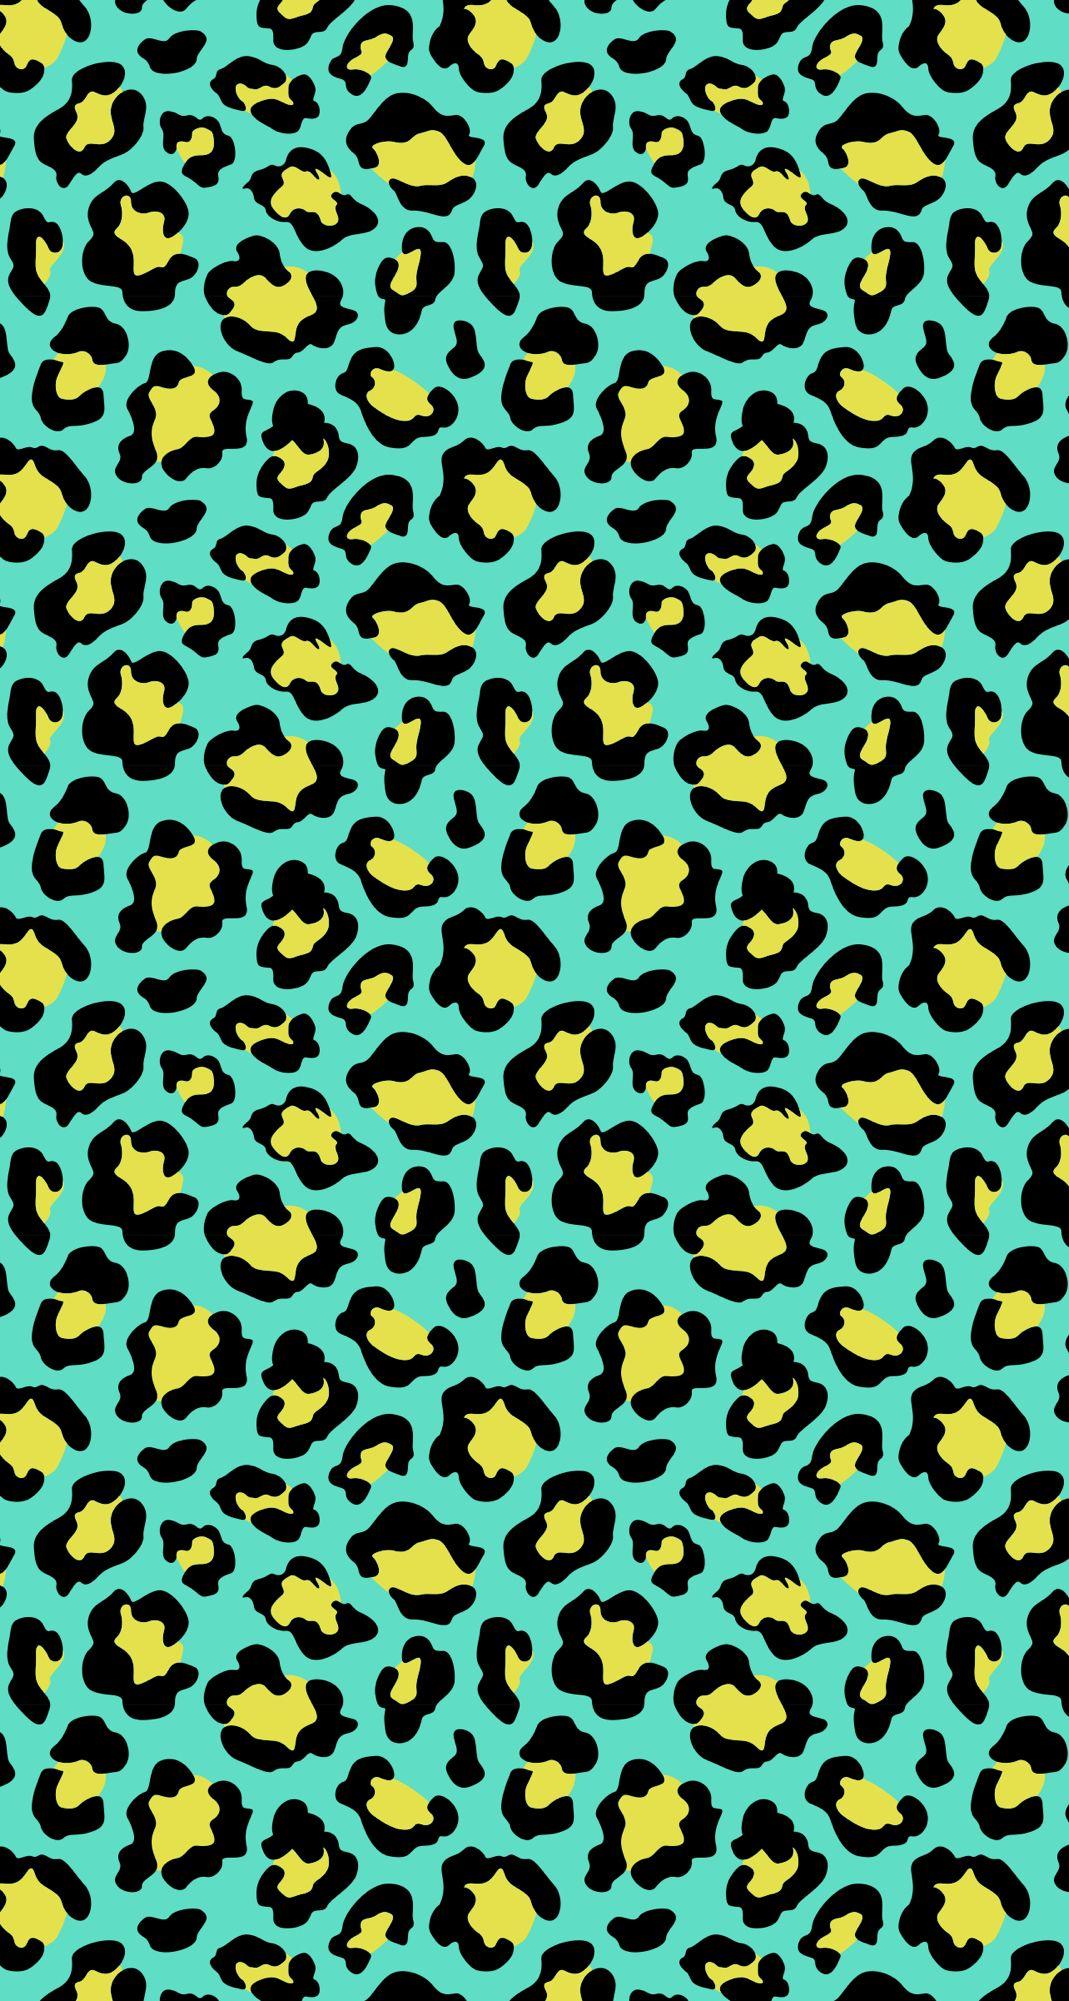 Neon green and yellow leopard print. iPhone wallpaper in 2019